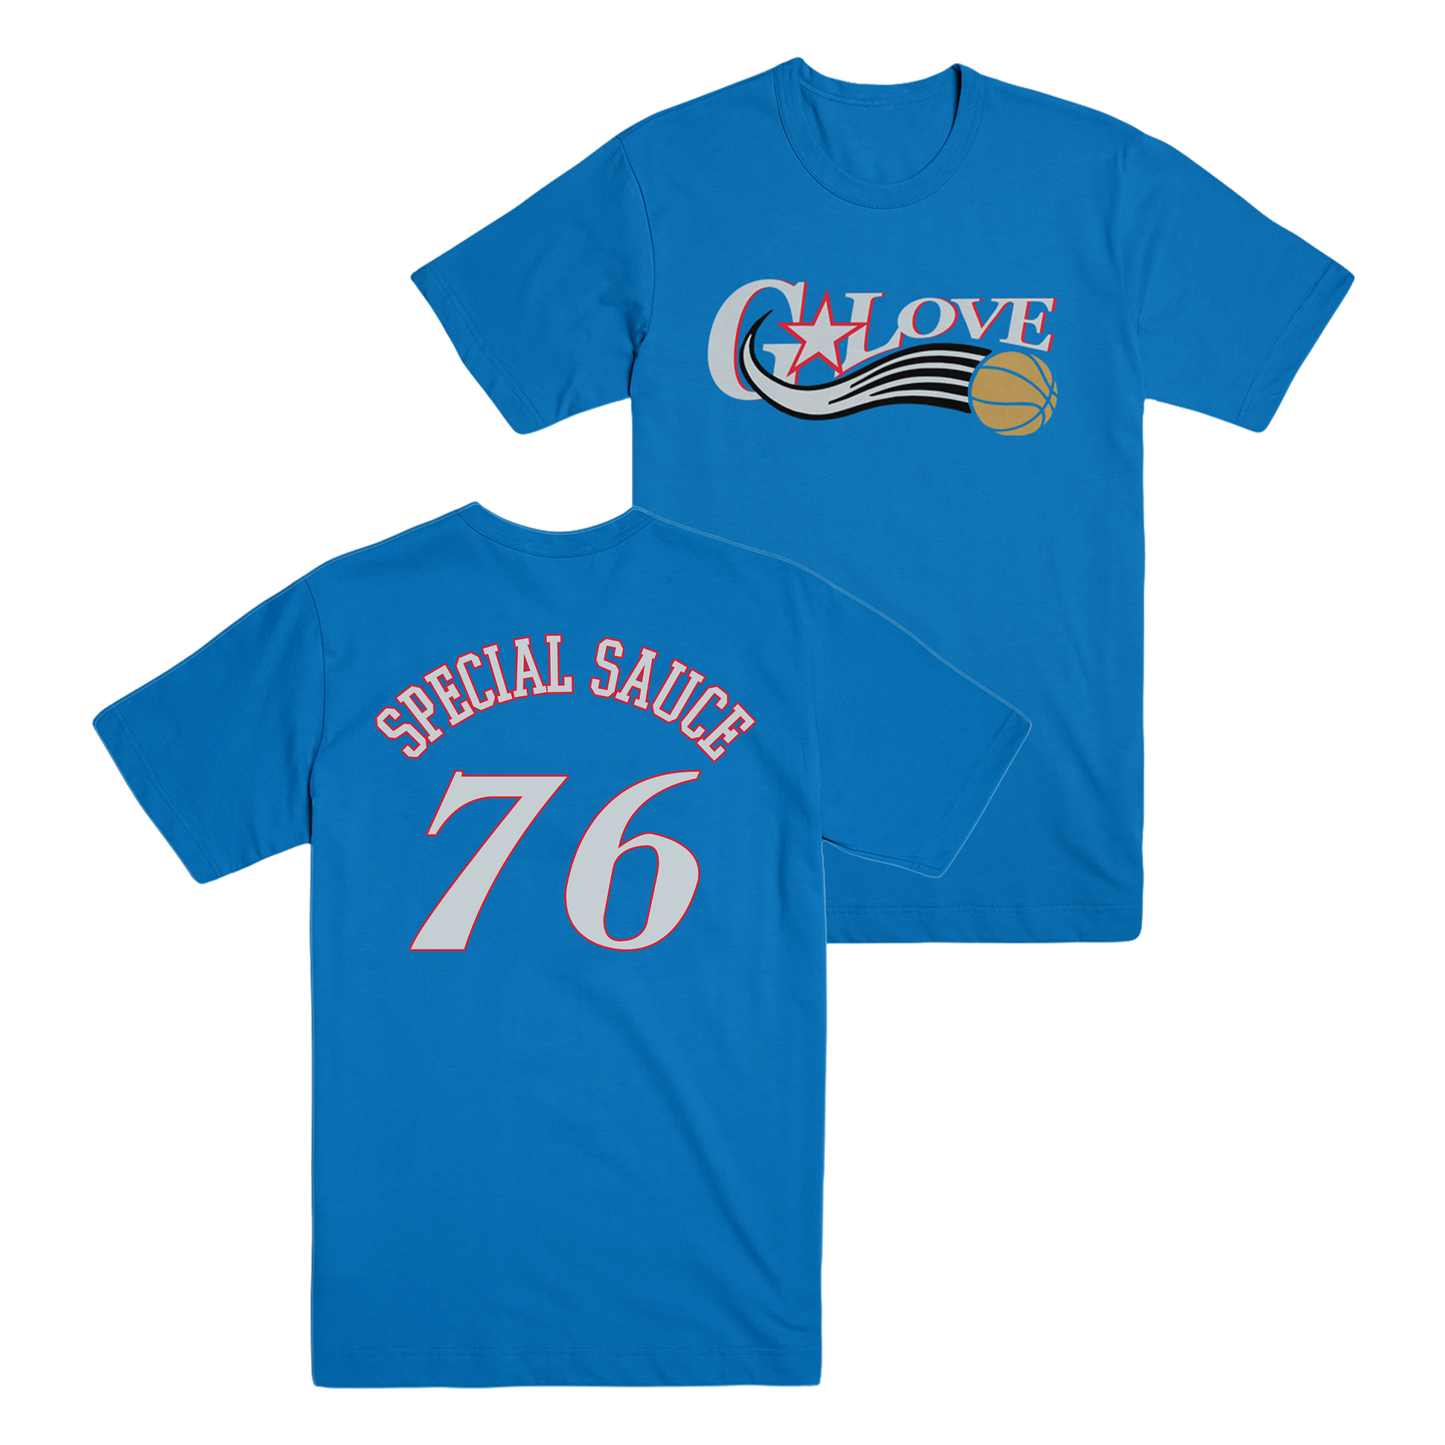 Sixers 76 Tee (Royal Blue) – G. Love